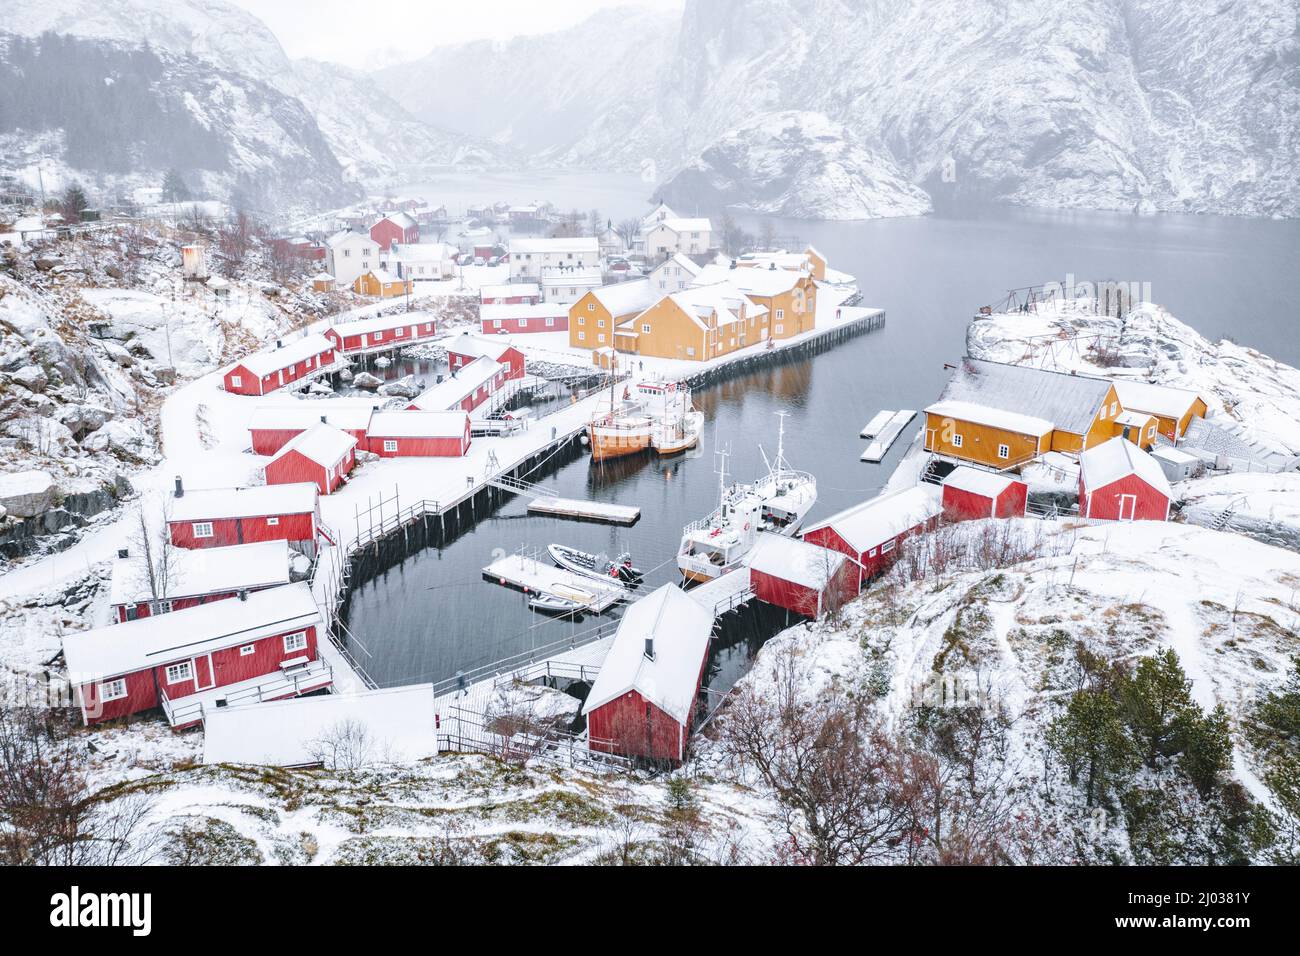 High angle view of traditional fishermen's cabins and harbor covered with snow, Nusfjord, Nordland, Lofoten Islands, Norway, Scandinavia, Europe Stock Photo